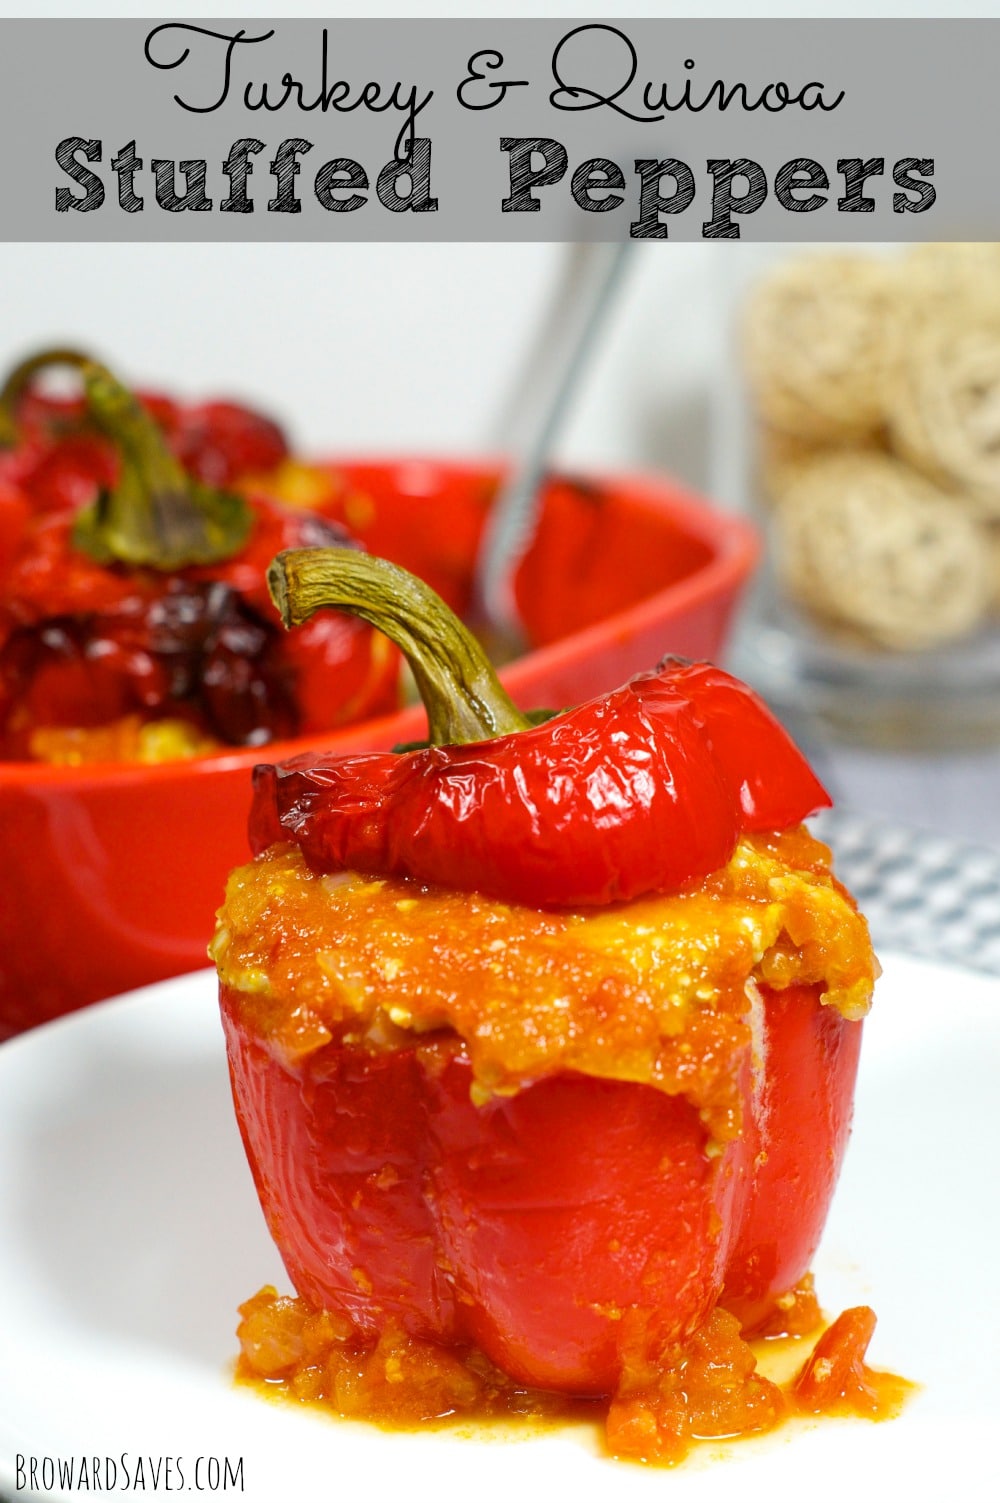 Delicious, low fat and satisfying, these Turkey Quinoa Stuffed Peppers are made with a tomato sauce. Easy to make and kid friendly. Try this recipe!